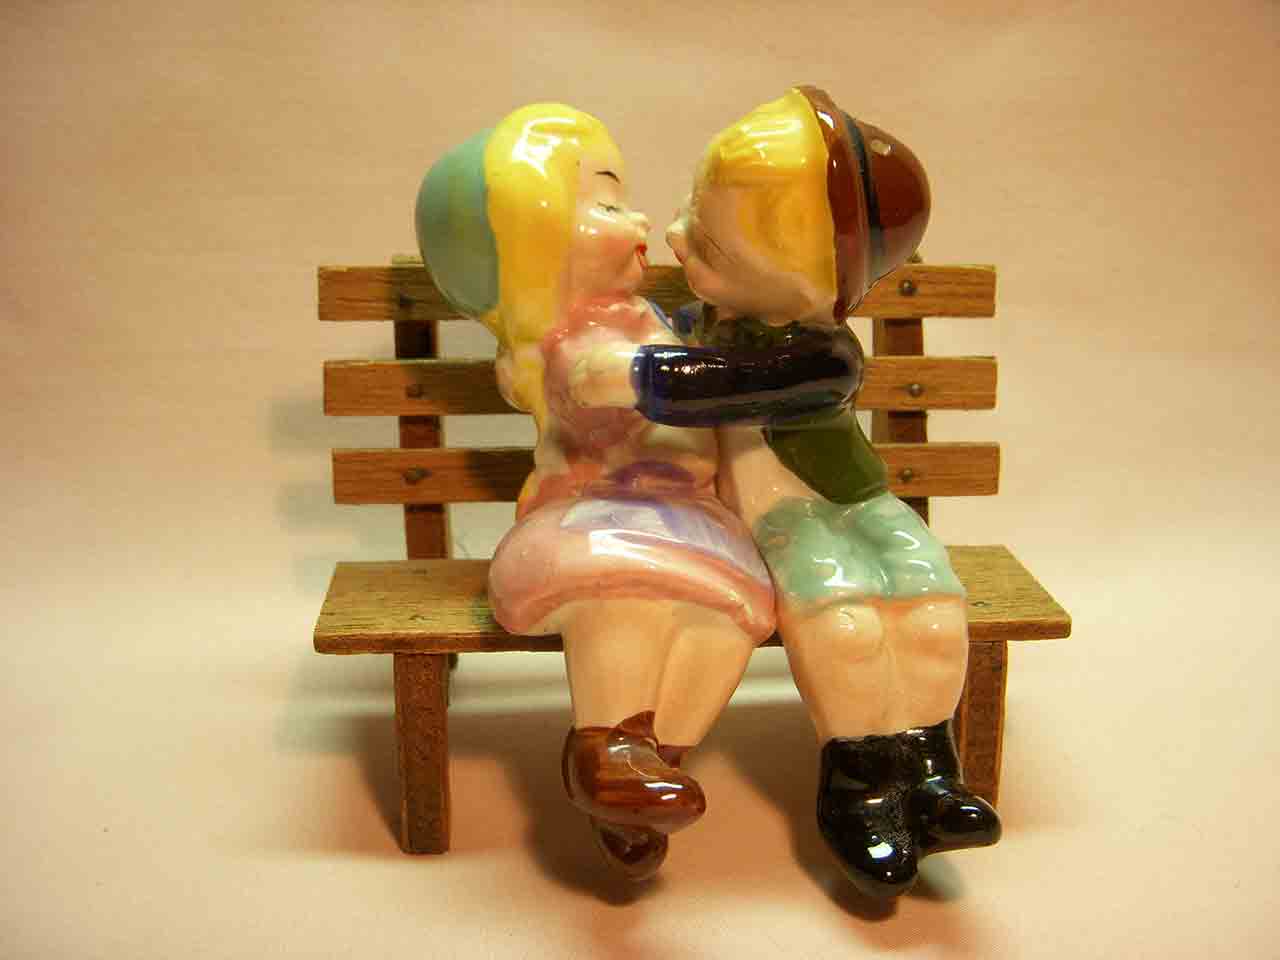 Boy and girl kissing sitting on wooden bench salt and pepper shaker